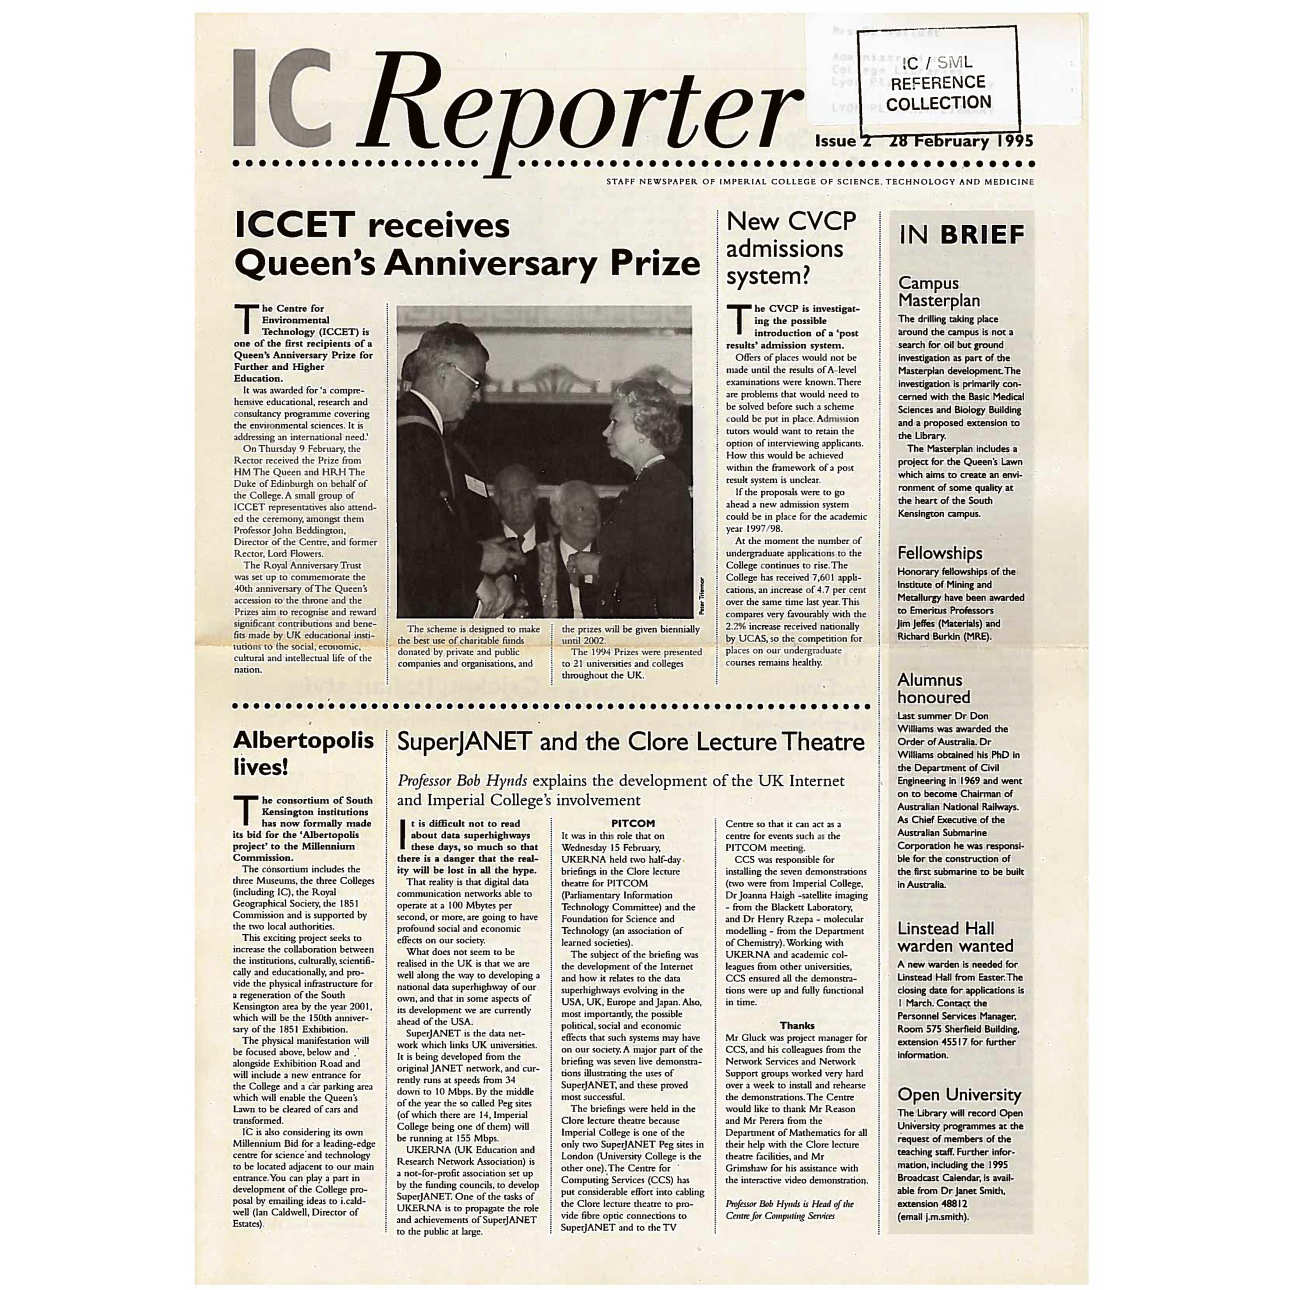 Issue 2, 28 February 1995 